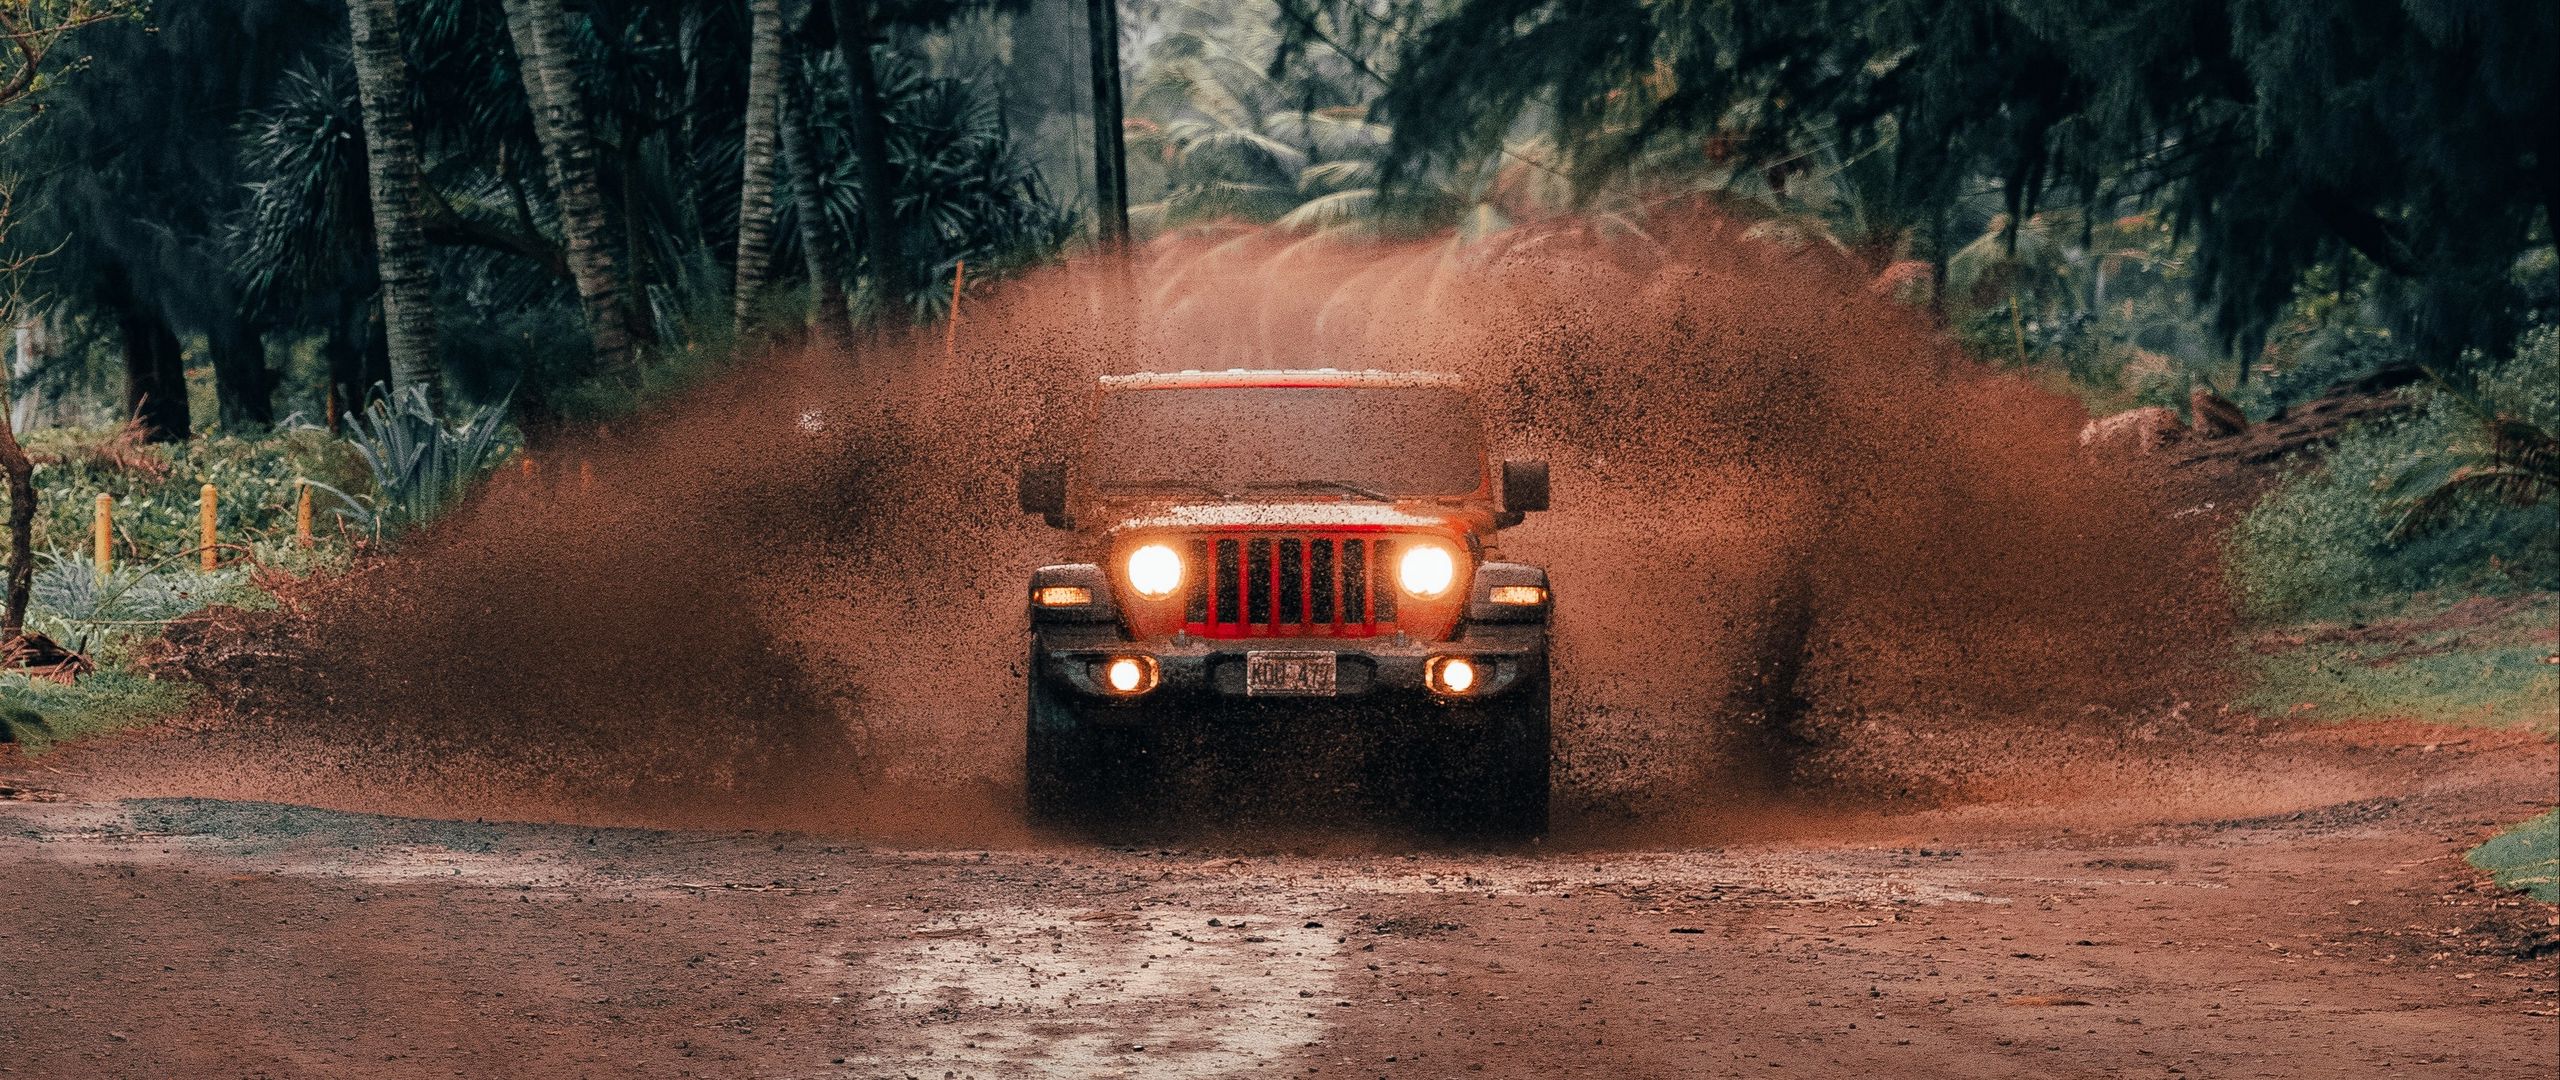 Download wallpaper 2560x1080 jeep wrangler, jeep, car, suv, red, tropics  dual wide 1080p hd background